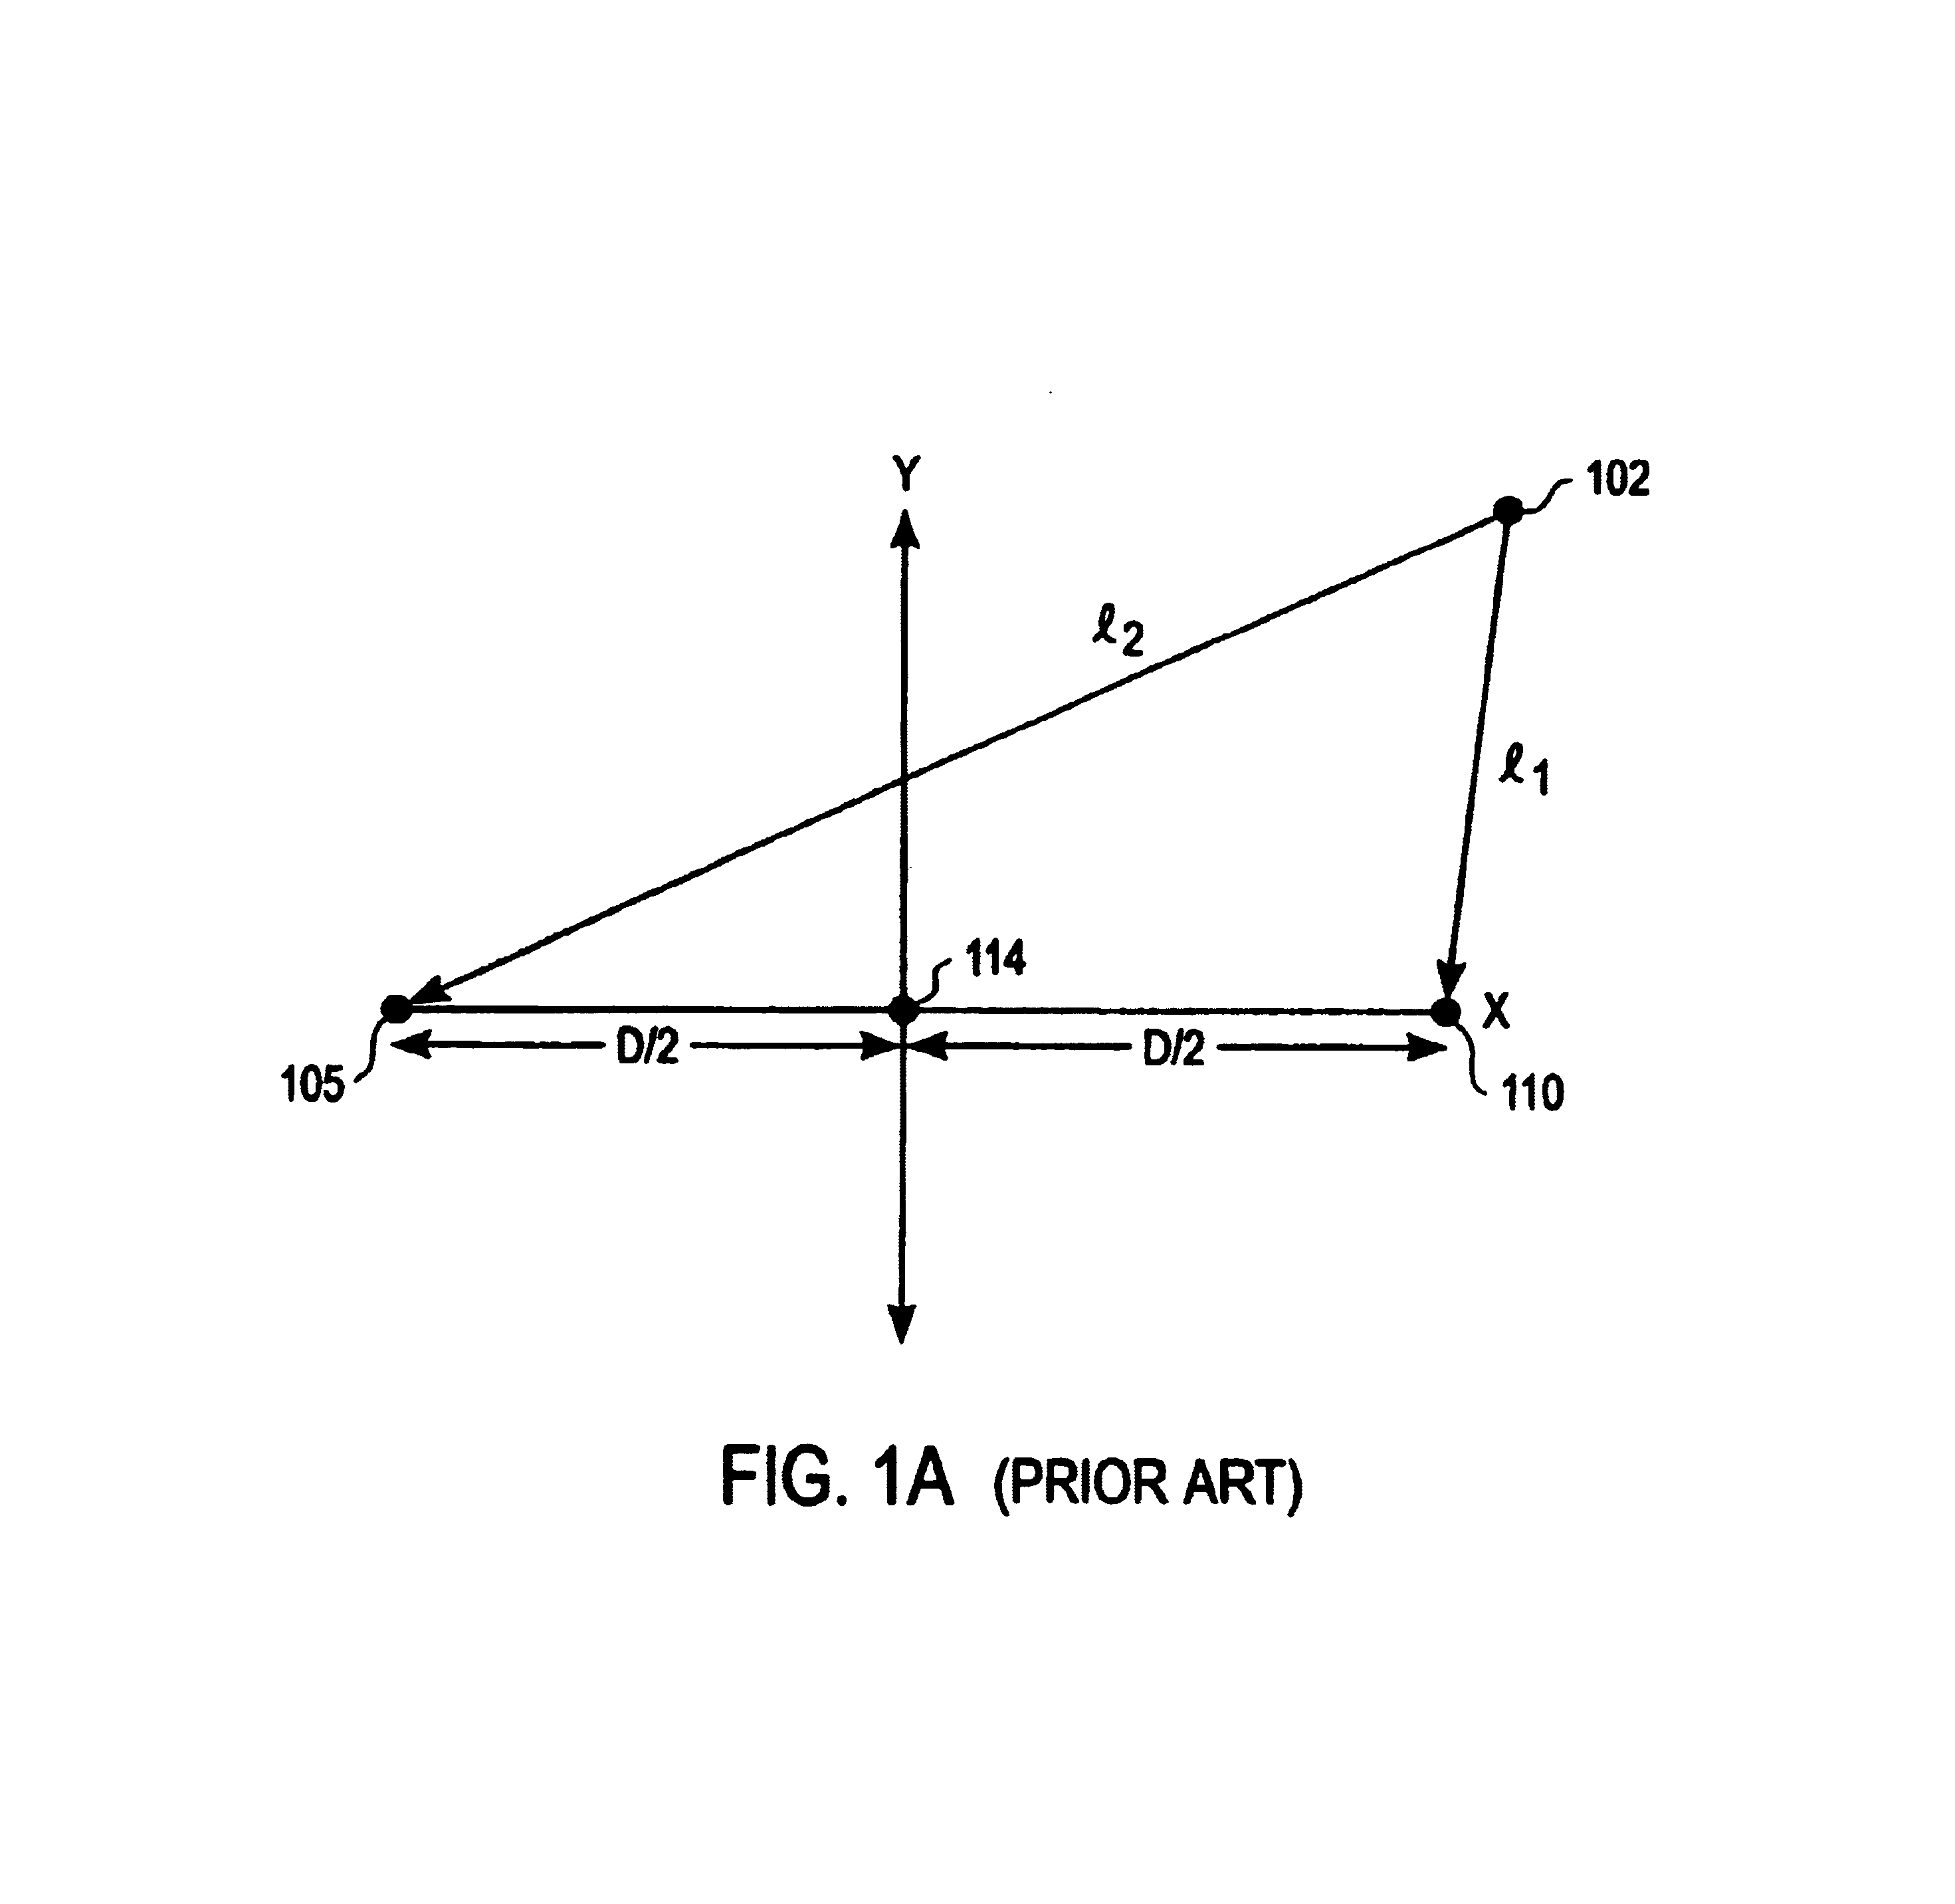 Acoustic source localization system and method